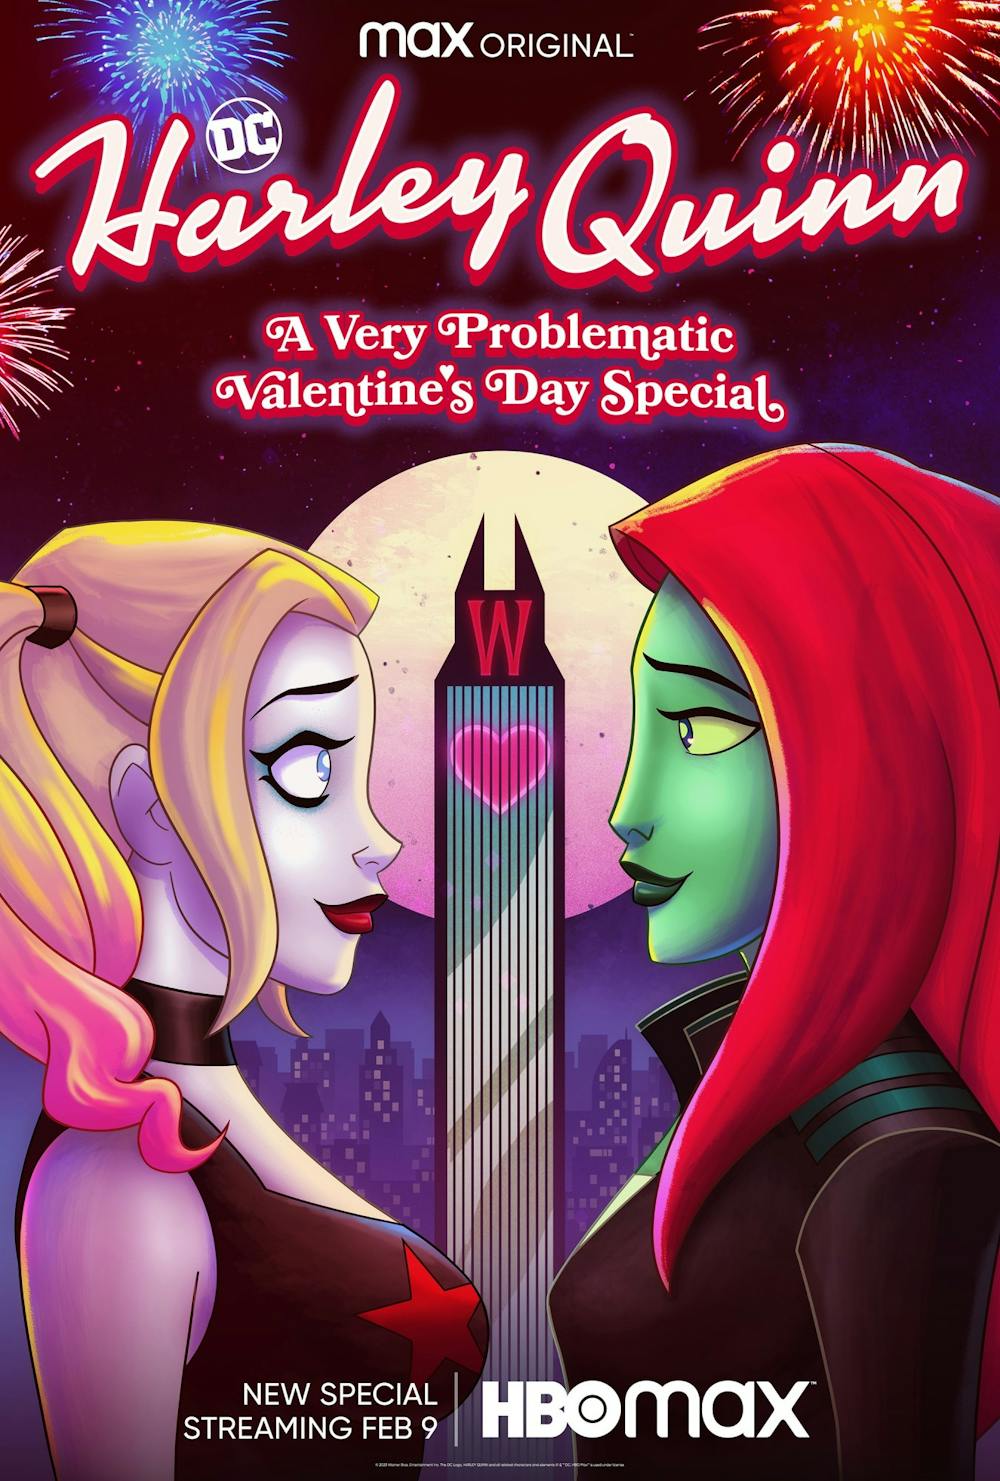 ‘Harley Quinn’ gives a hilarious special for all sorts of people this Valentine's Day